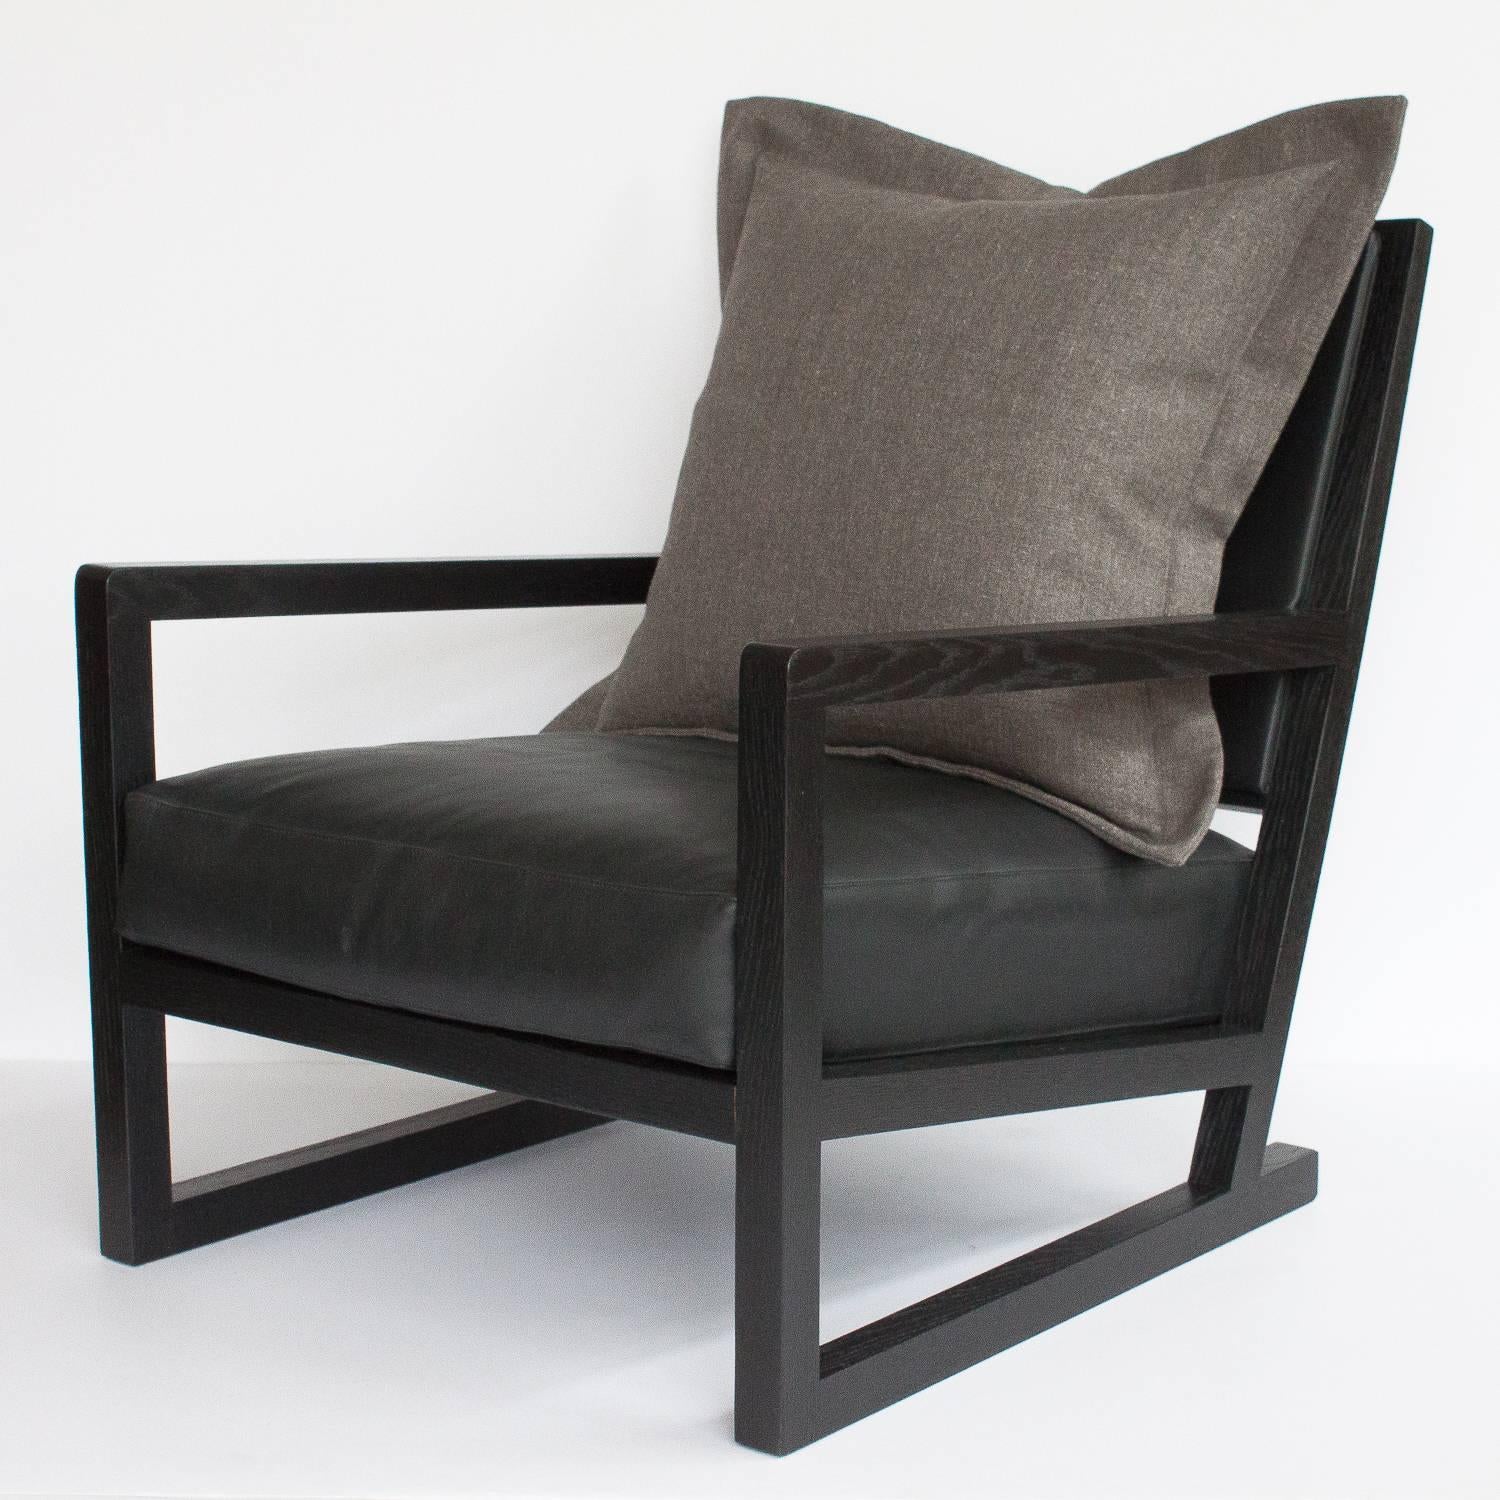 Clio armchair by Antonio Citterio for B&B Italia / Maxalto. From the Simplice collection, 2005 production year. Solid oak frame with a brushed black ebonized finish. The seat and back are upholstered in a charcoal leather. The loose back pillow is